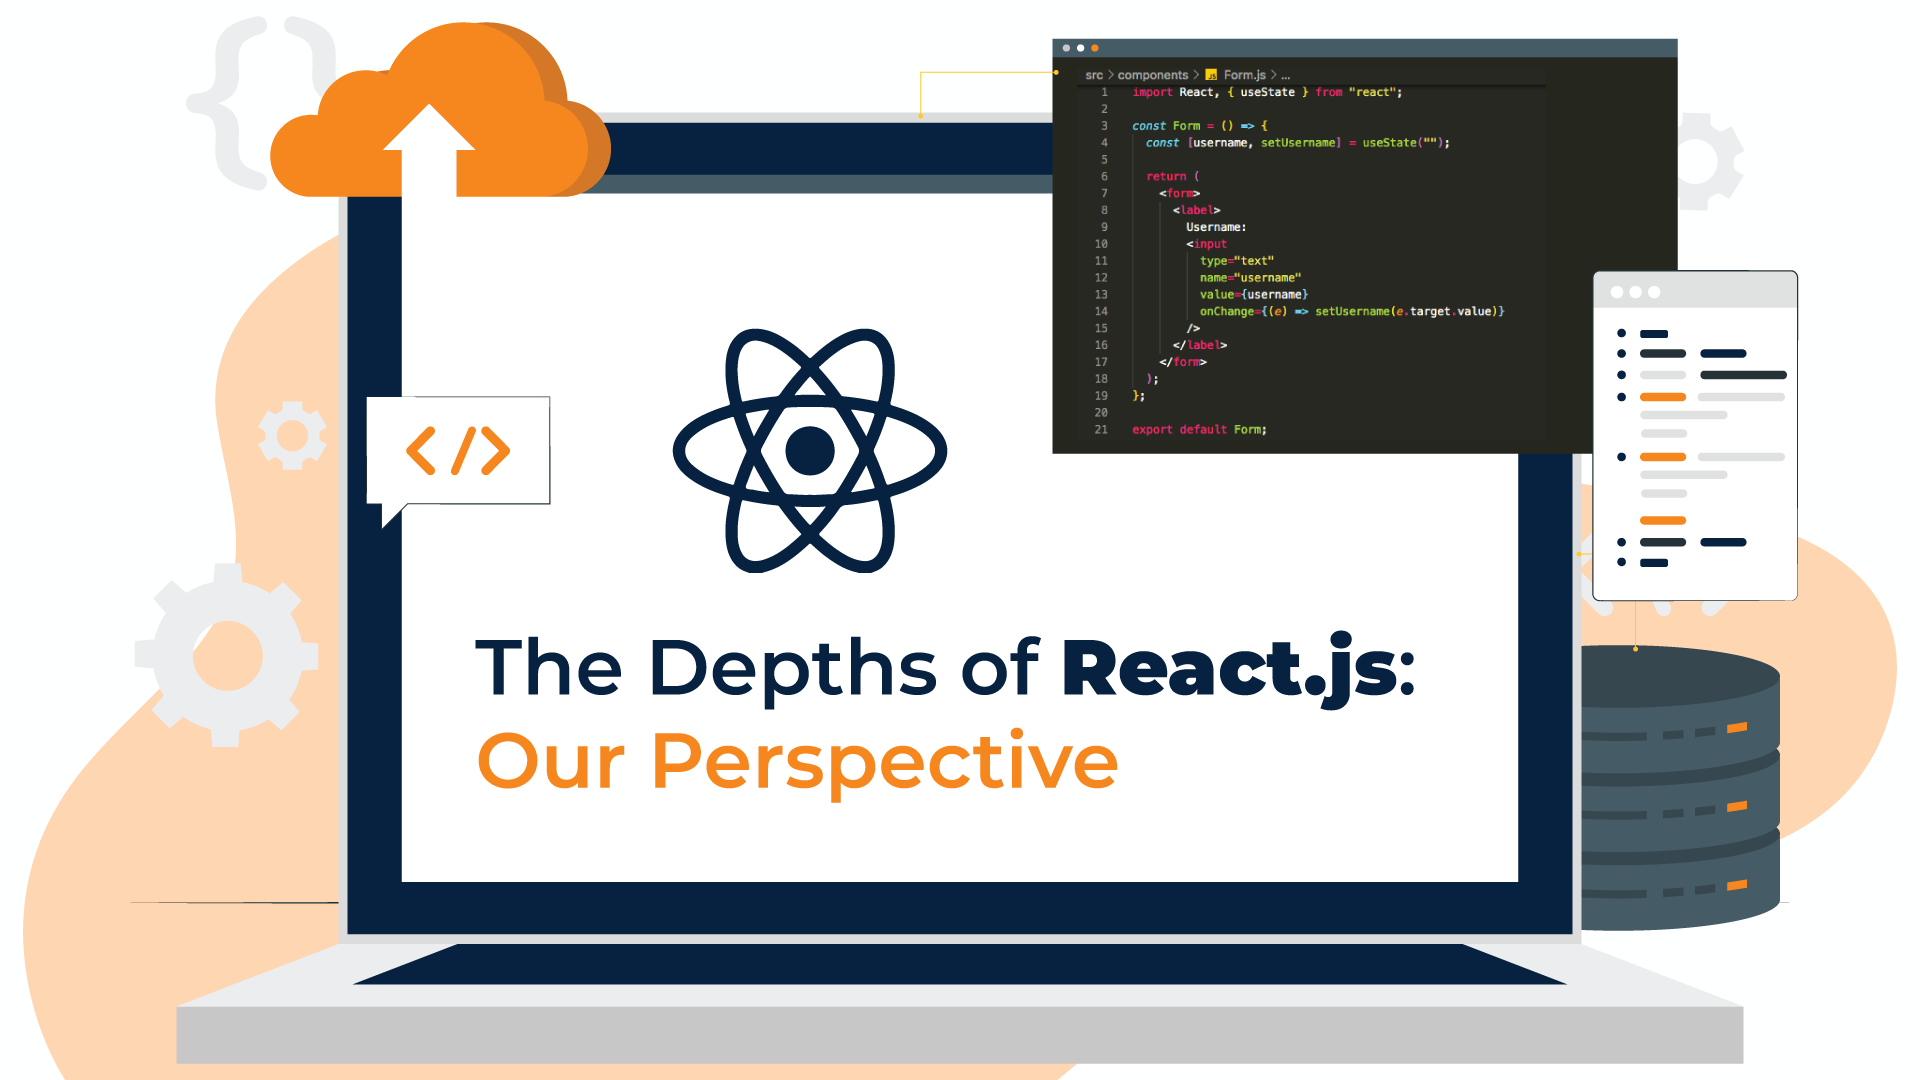 The Depths of React.js: Our Perspective